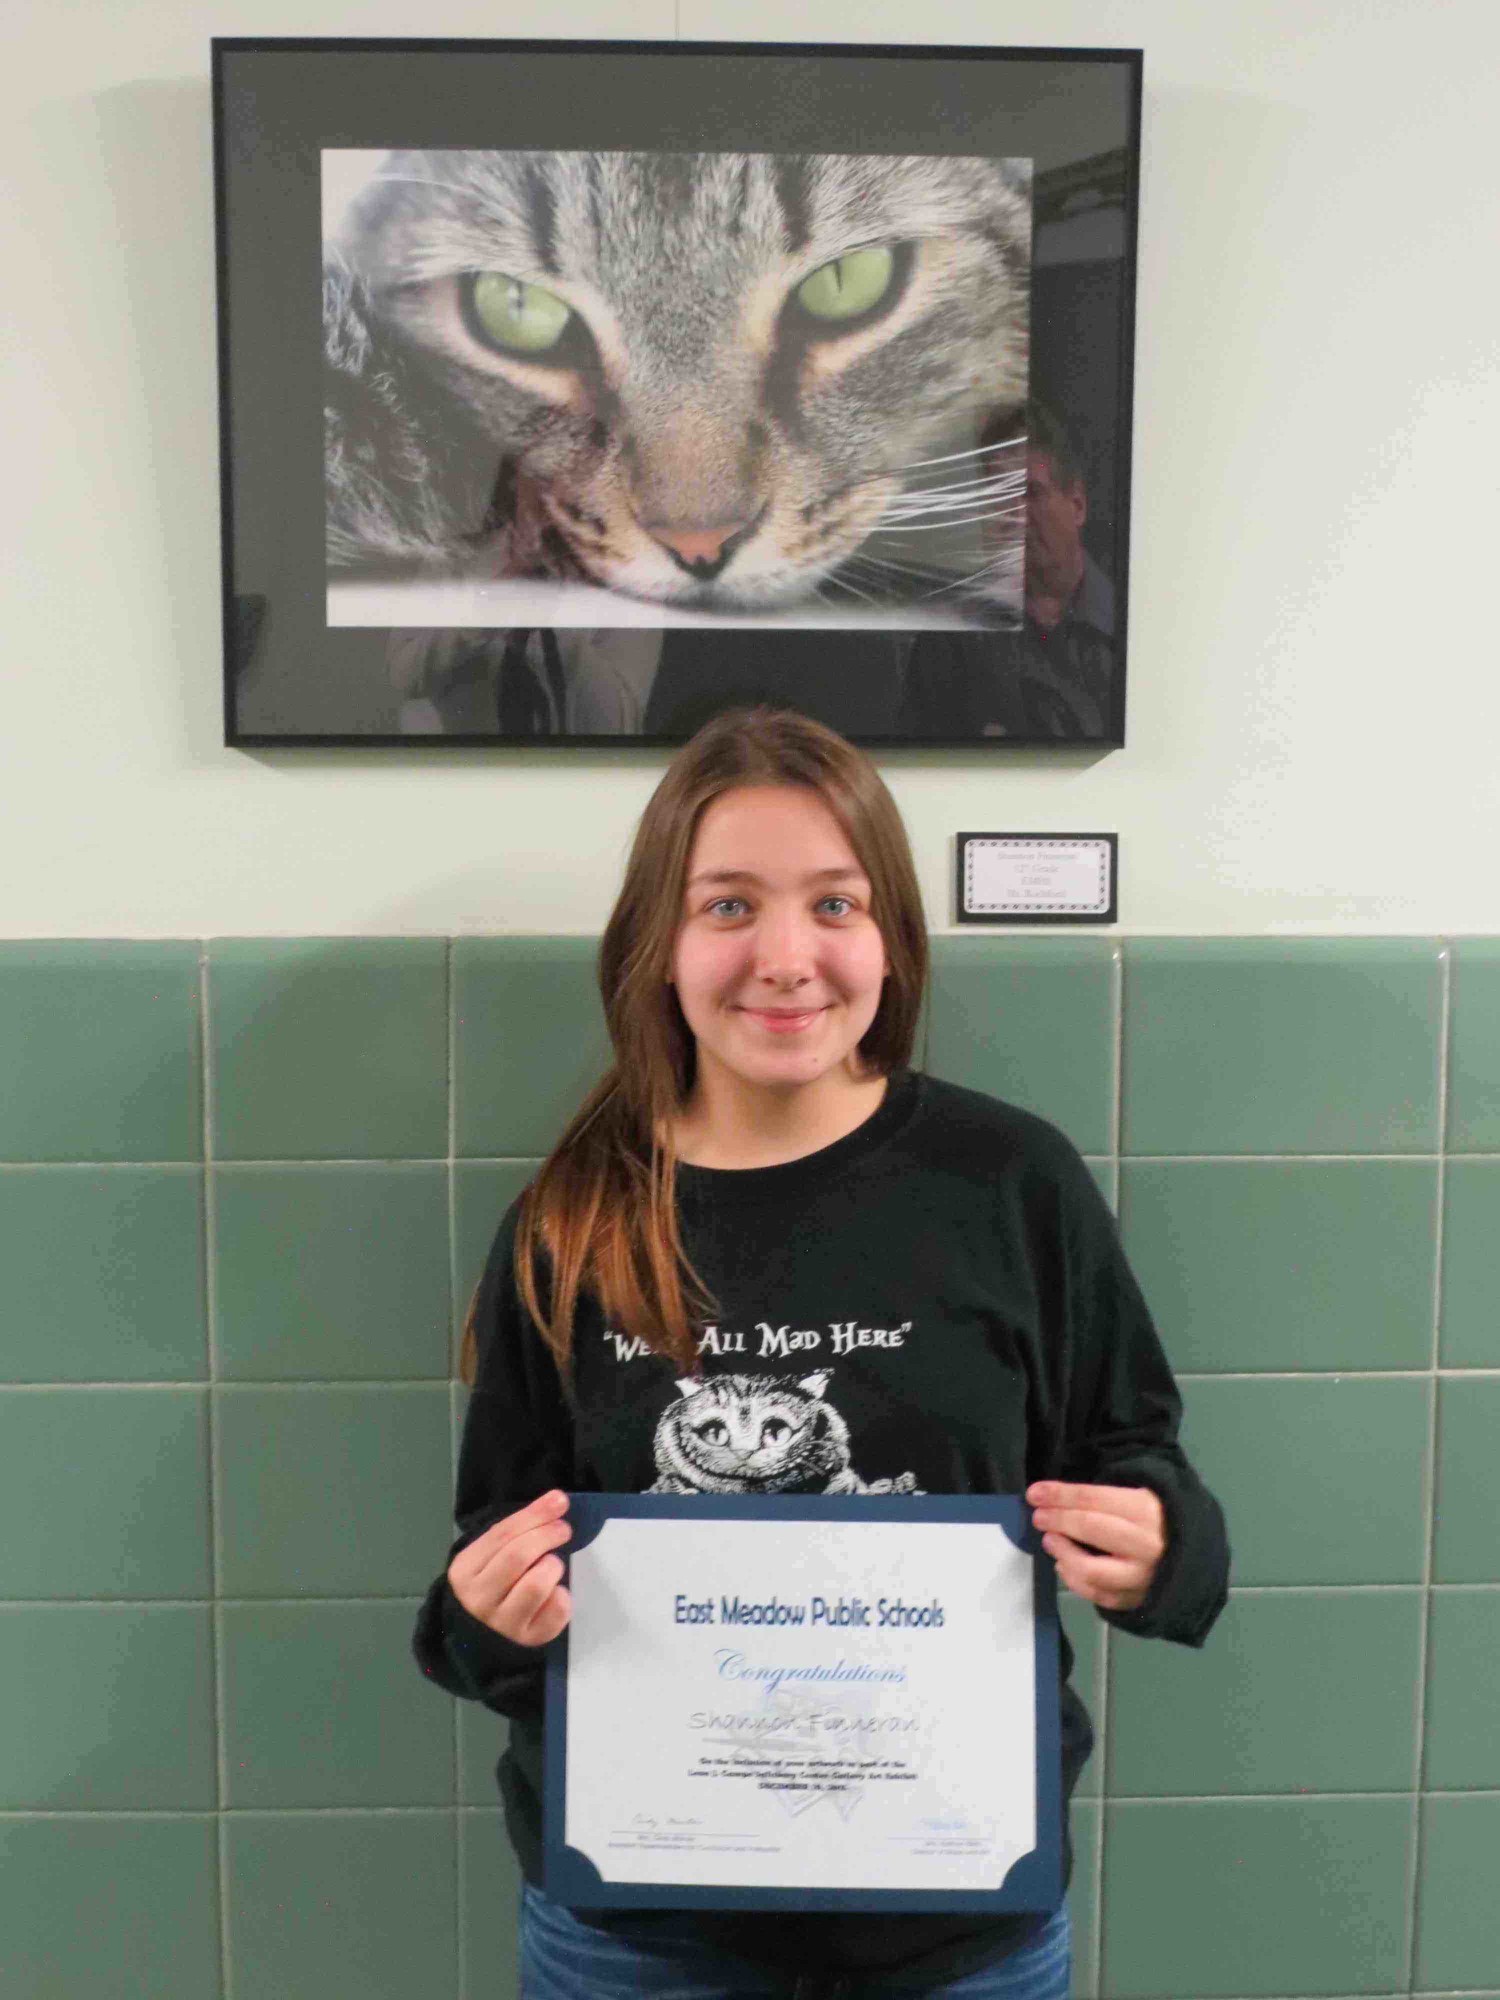 East Meadow High School senior Shannon Fanneran was acknowledged for her photography.